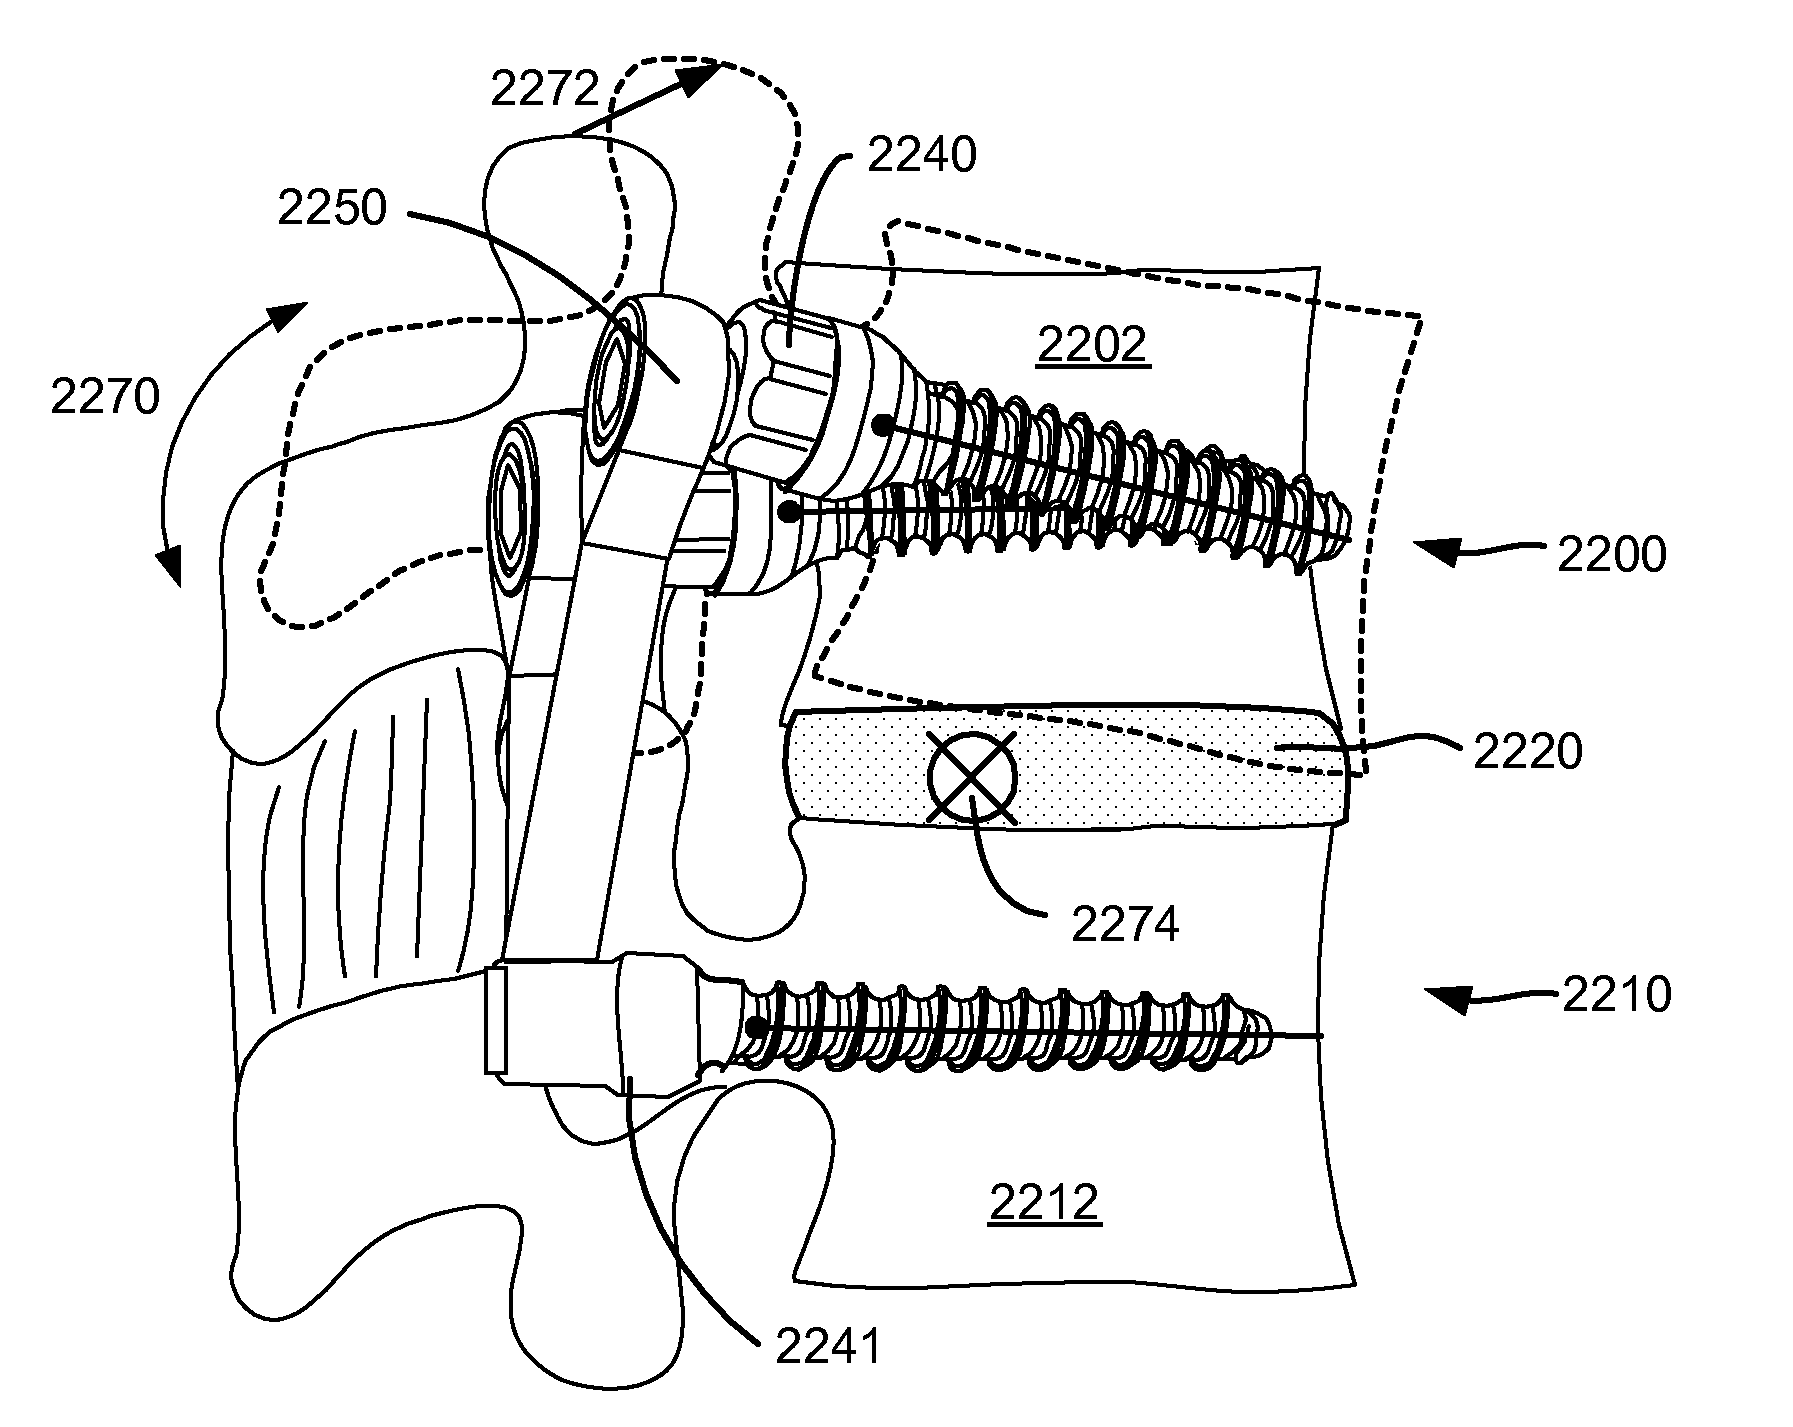 Spinal prosthesis having a three bar linkage for motion preservation and dynamic stabilization of the spine